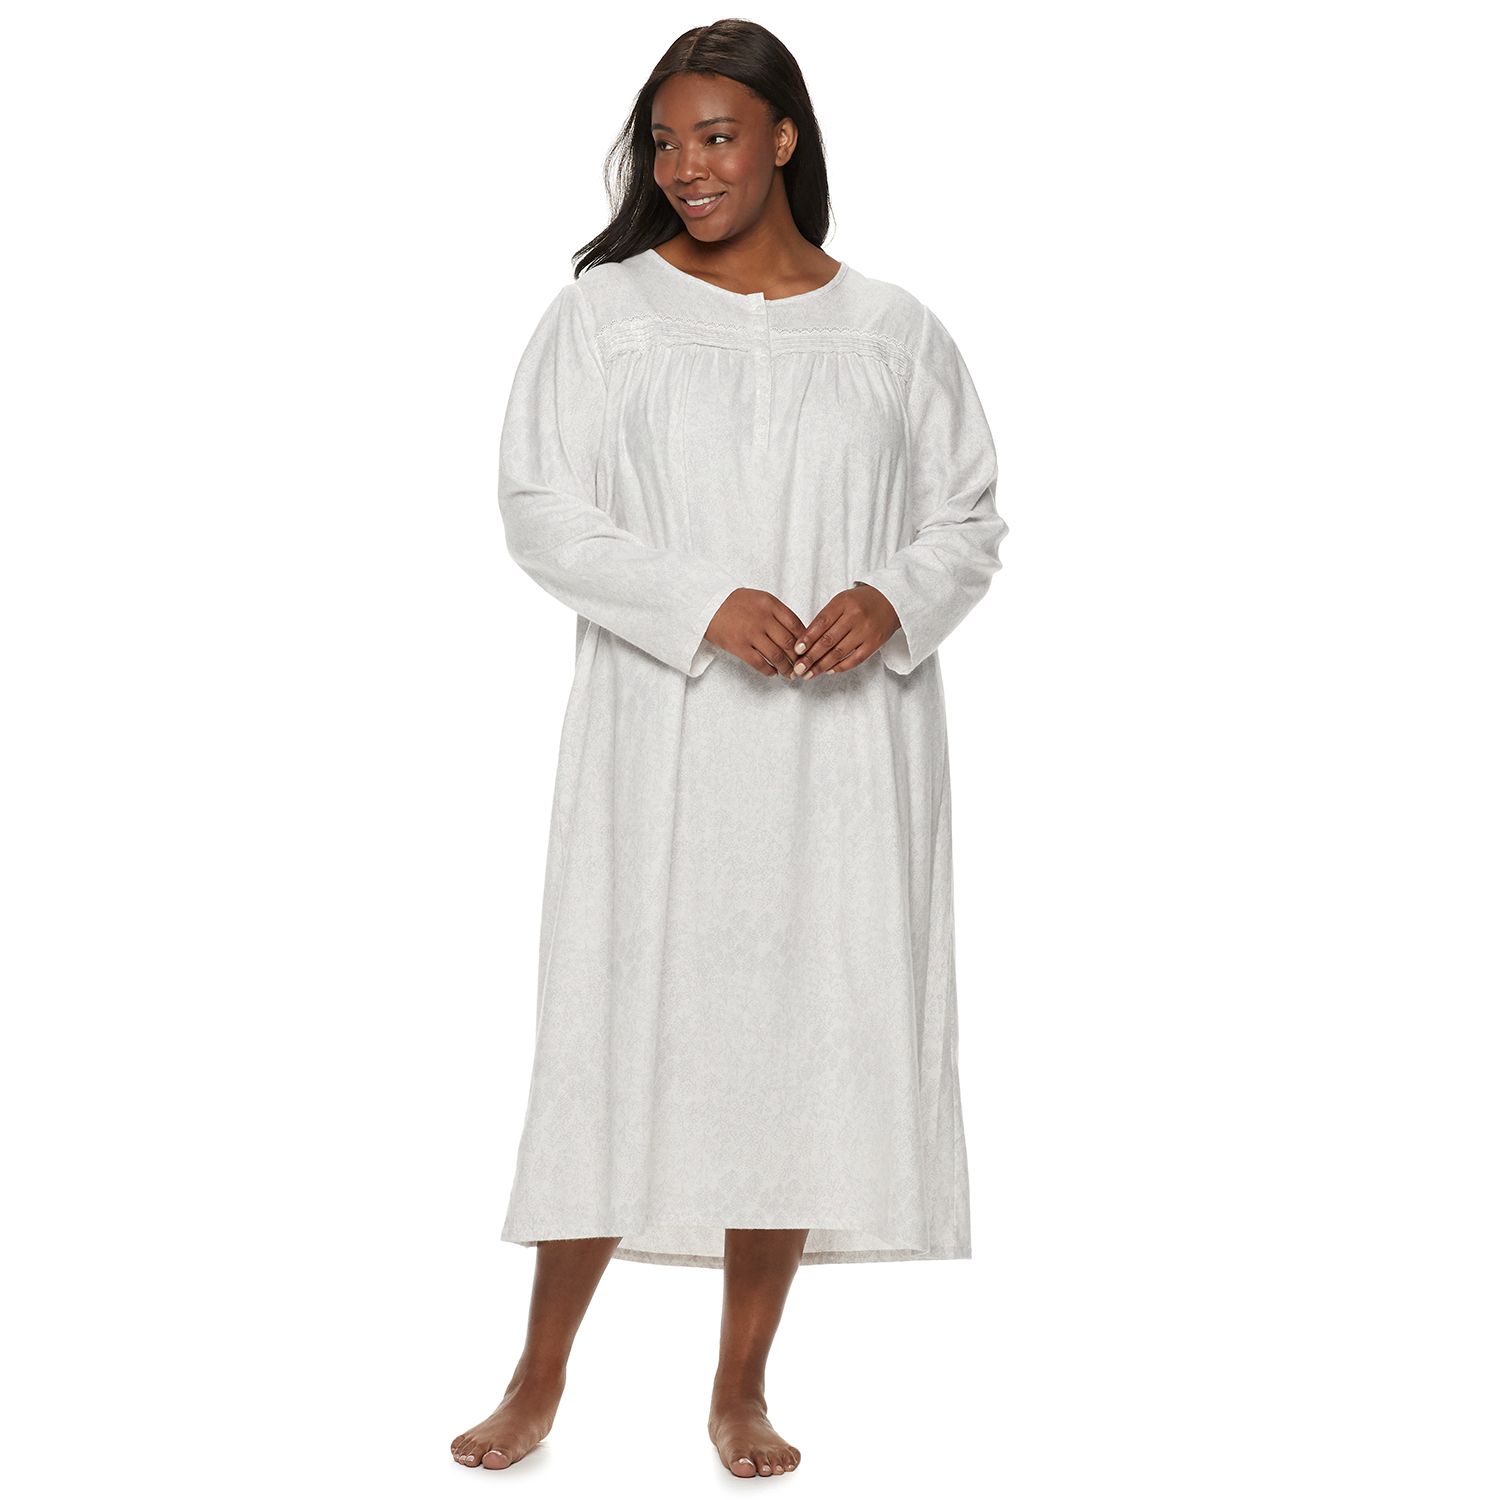 flannel nightgowns plus size